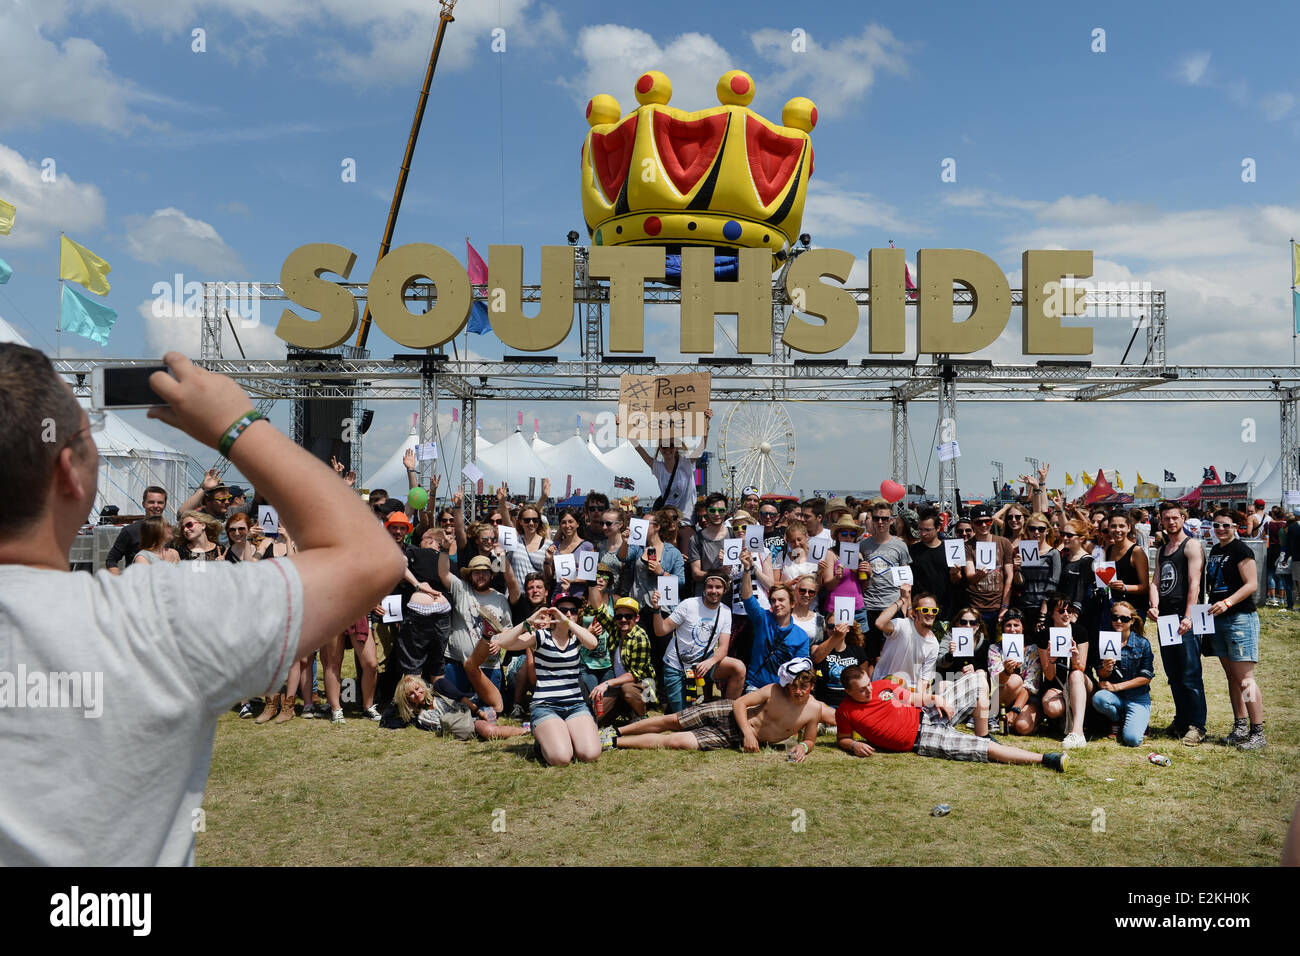 Fifty visitors pose for visitor Anja Seehaus from Weinheim whose father celebrates his 50th birthday on Friday at the Southside Festival in Neuhausen ob Eck, Germany, 20 June 2014. Anja Seehaus made a sign with the line 'Dad is the best'. Photo: FELIX KAESTLE/dpa Stock Photo